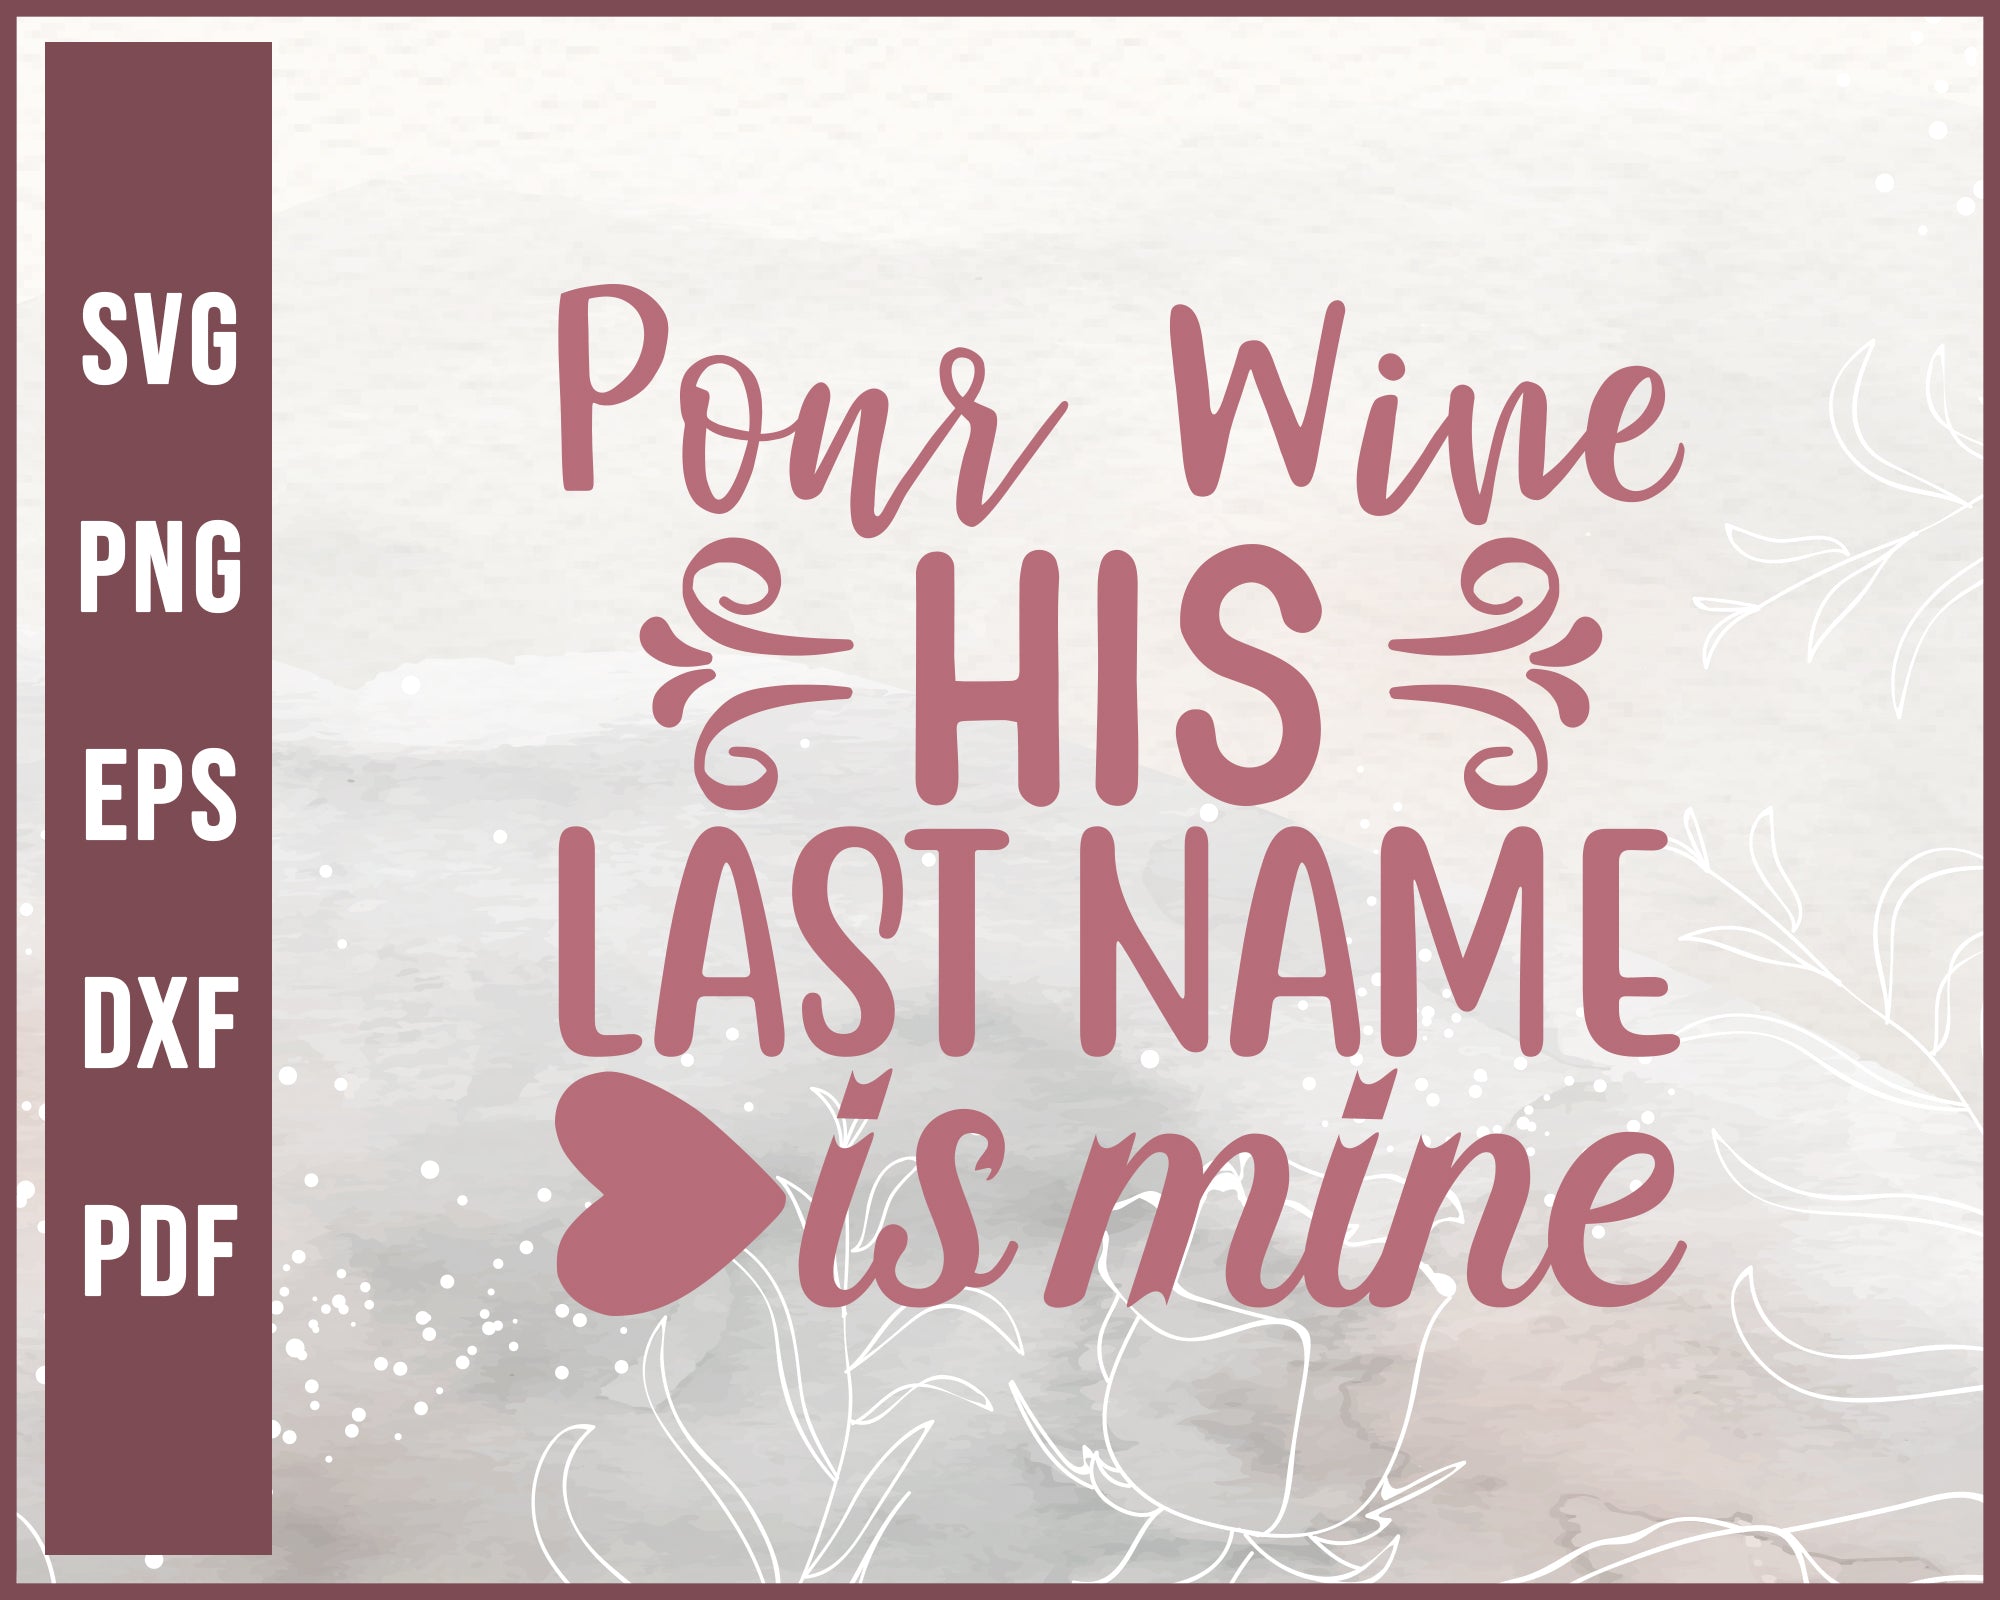 Pour Wine His Last Name His Mine Wedding svg Designs For Cricut Silhouette And eps png Printable Files